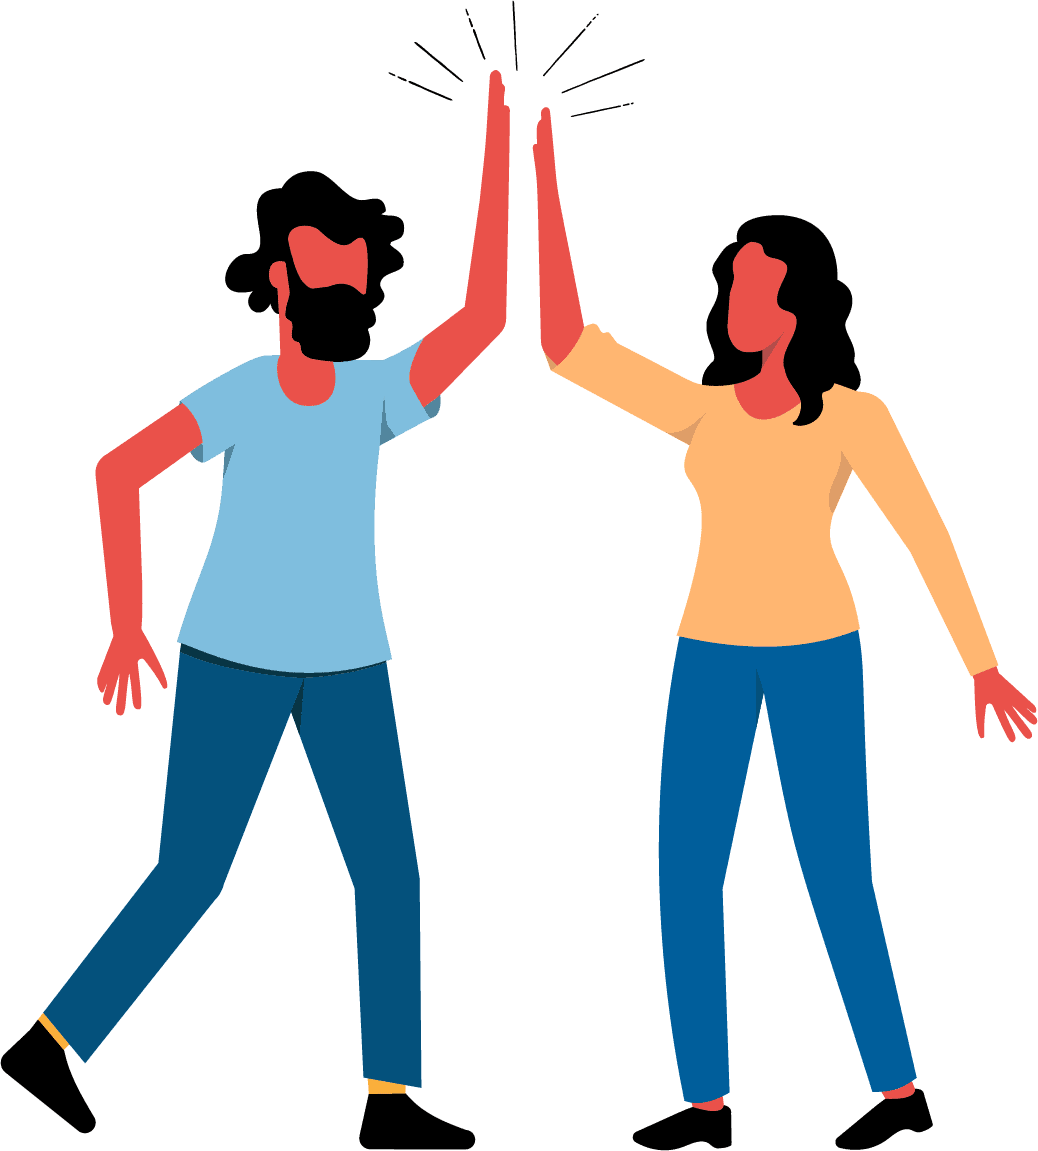 Two human adults using the common gesture of celebration or greeting in which two humans slap each other's open palm with their arms raised.